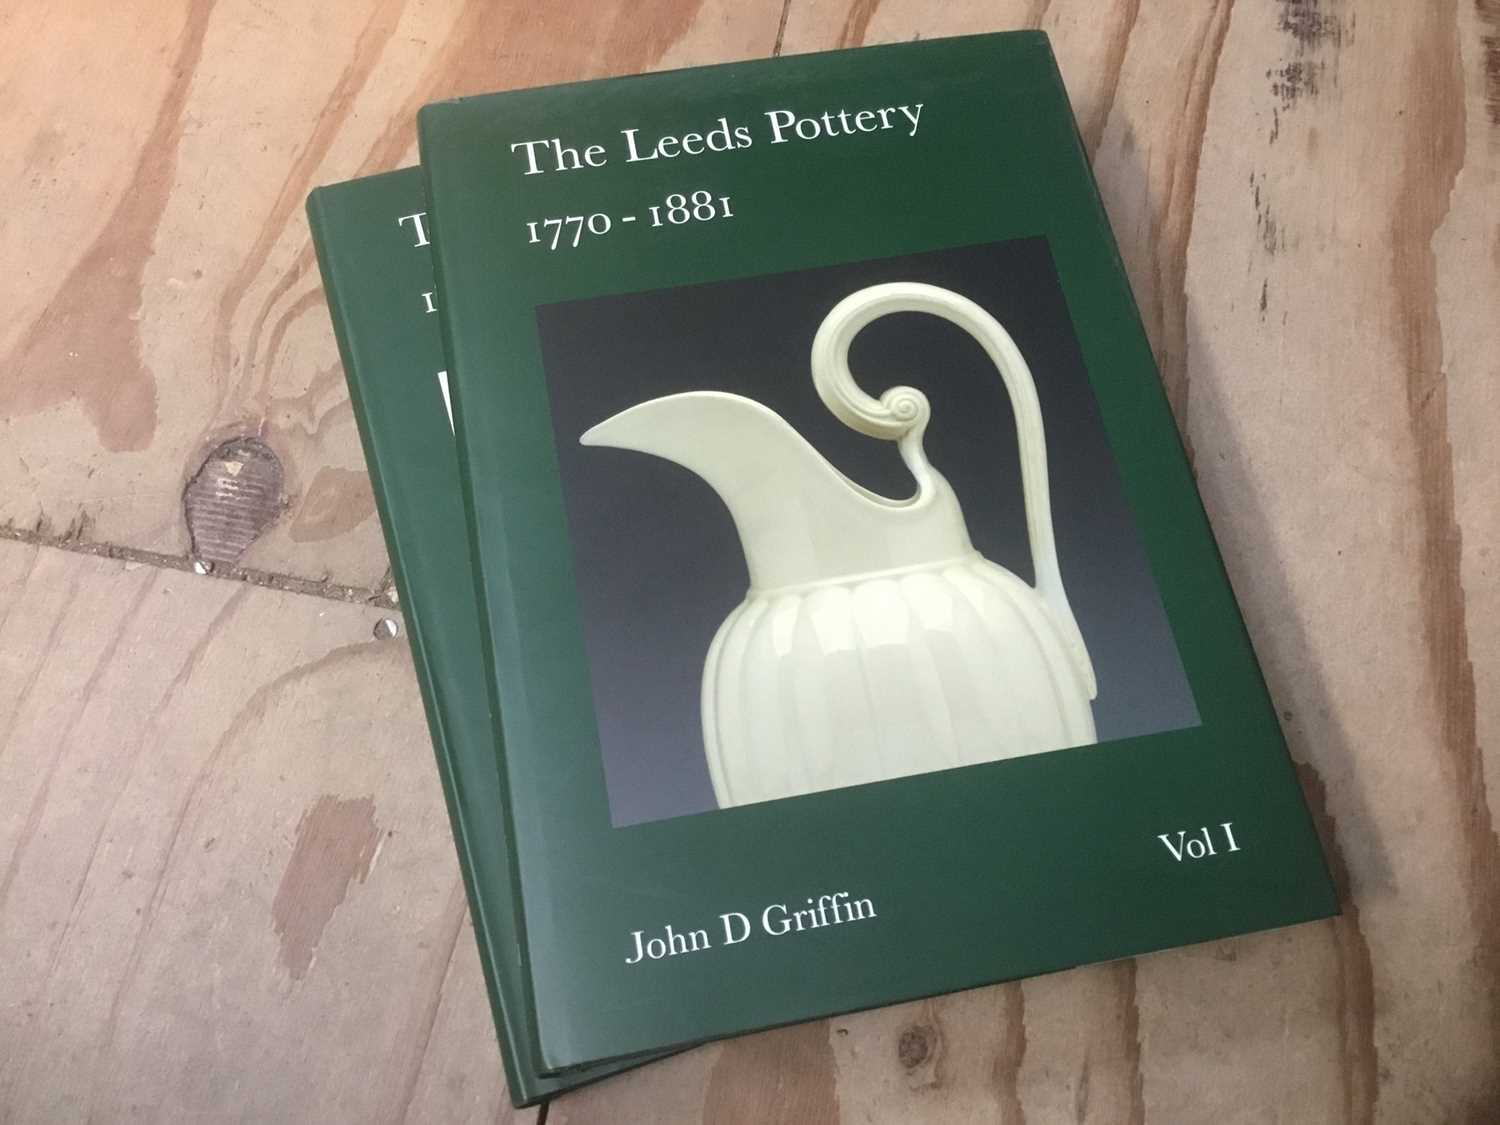 John D Griffin - The Leeds Pottery 1770-1881, The Leeds Art Collections Fund 2005, 1st edition, 2 Vo